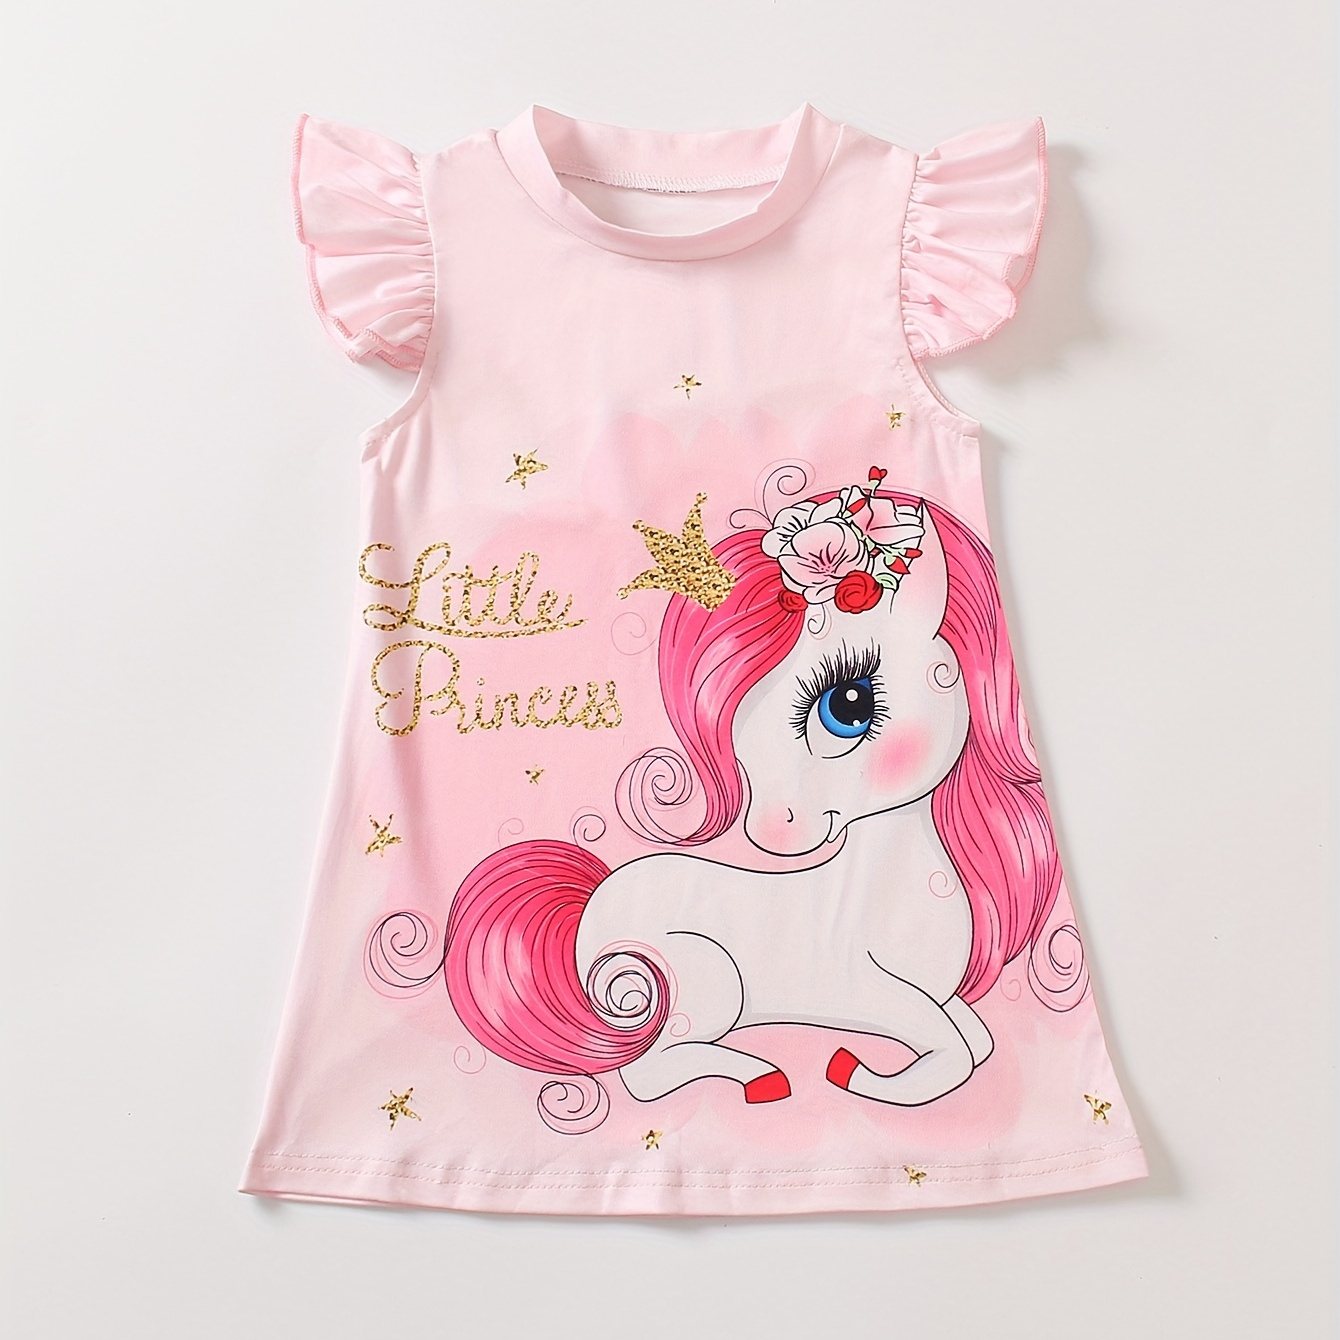 

Baby Girls Cartoon Unicorn Print Dress, Casual Cute Letter Print, Small Flying Sleeves, Small Stand Collar Dress, Summer Thin Style